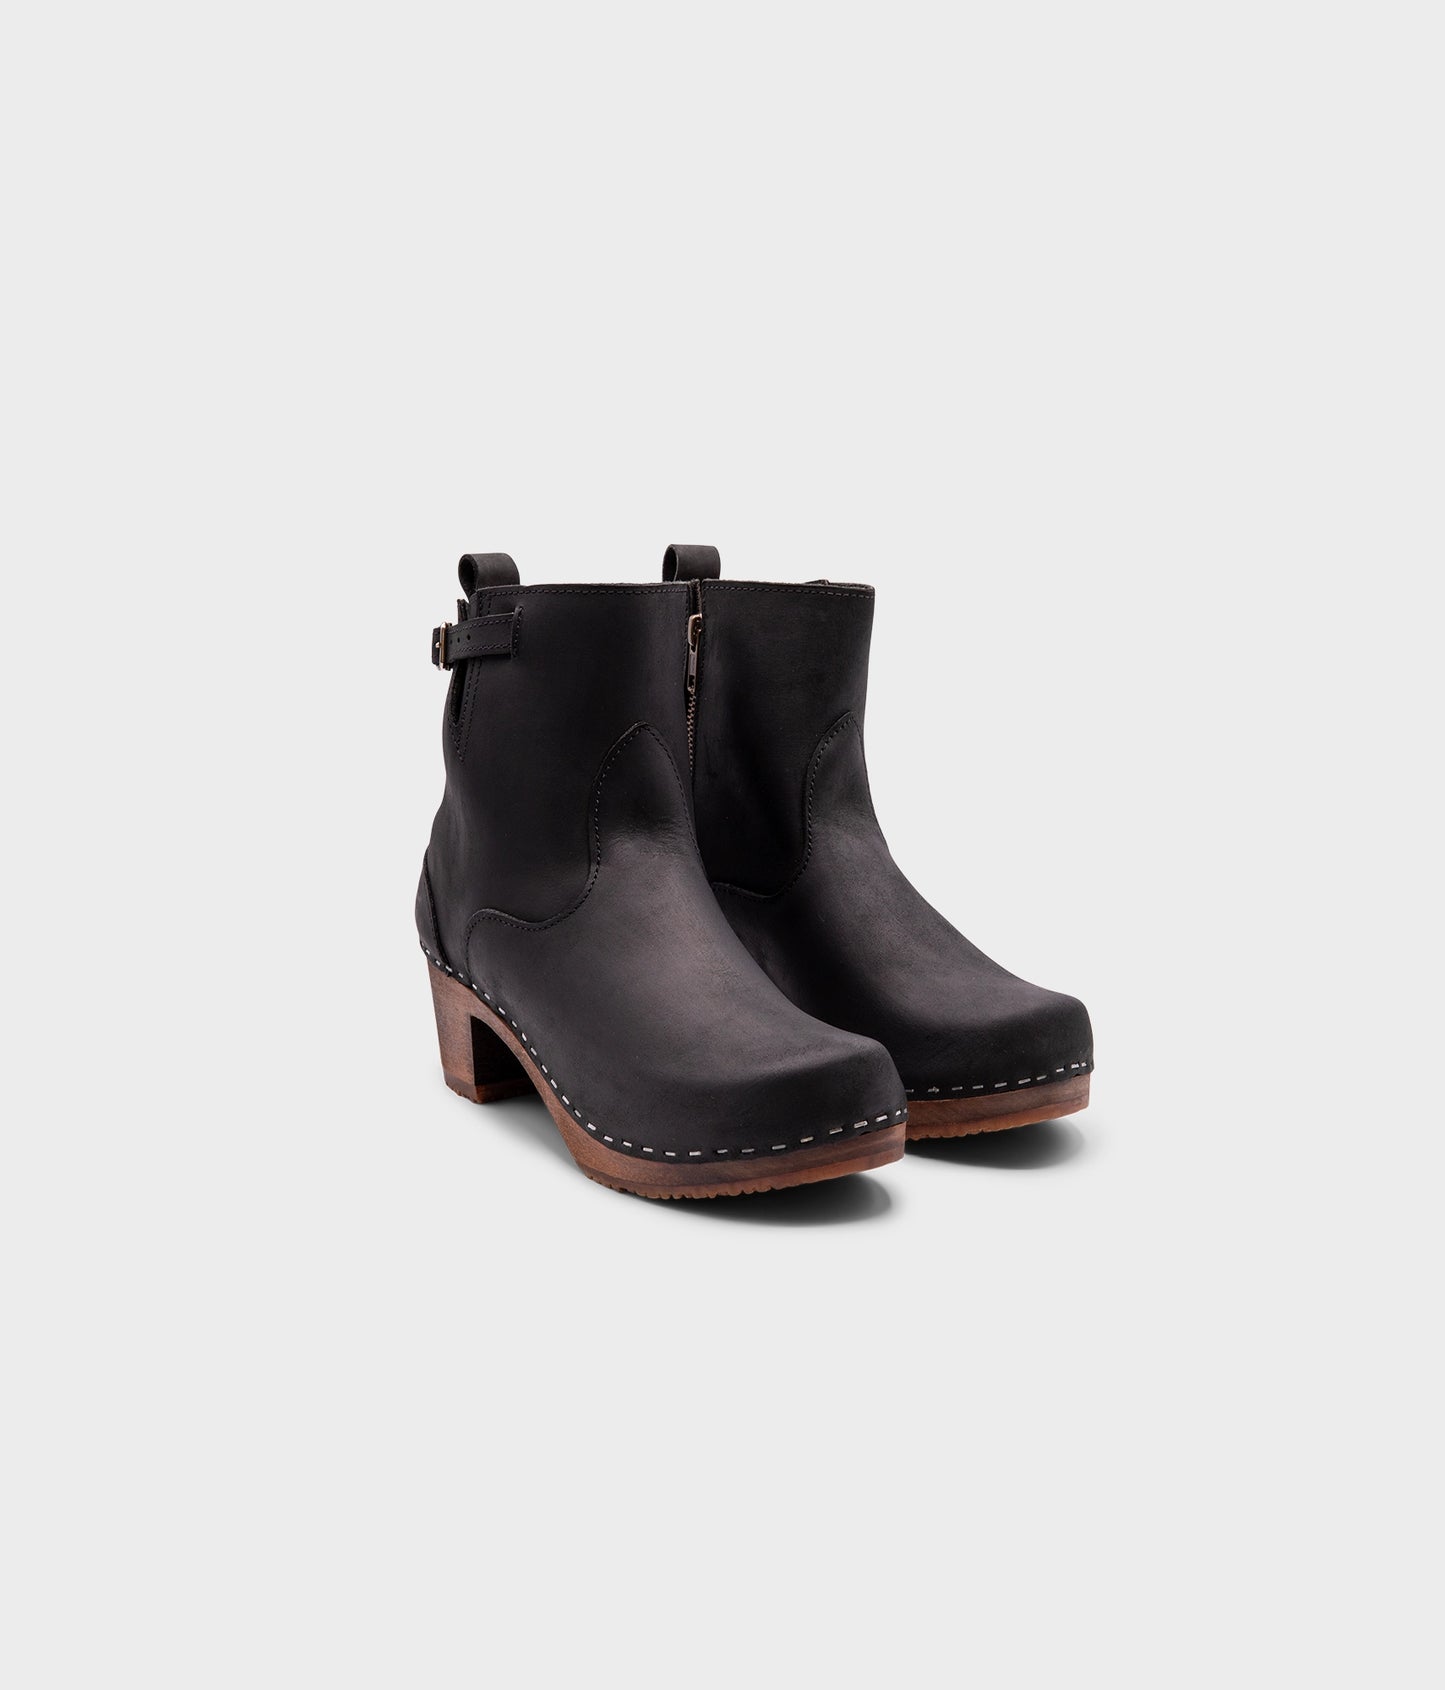 high-heeled clog boots in black nubuck leather stapled on a dark wooden base with a silver buckle